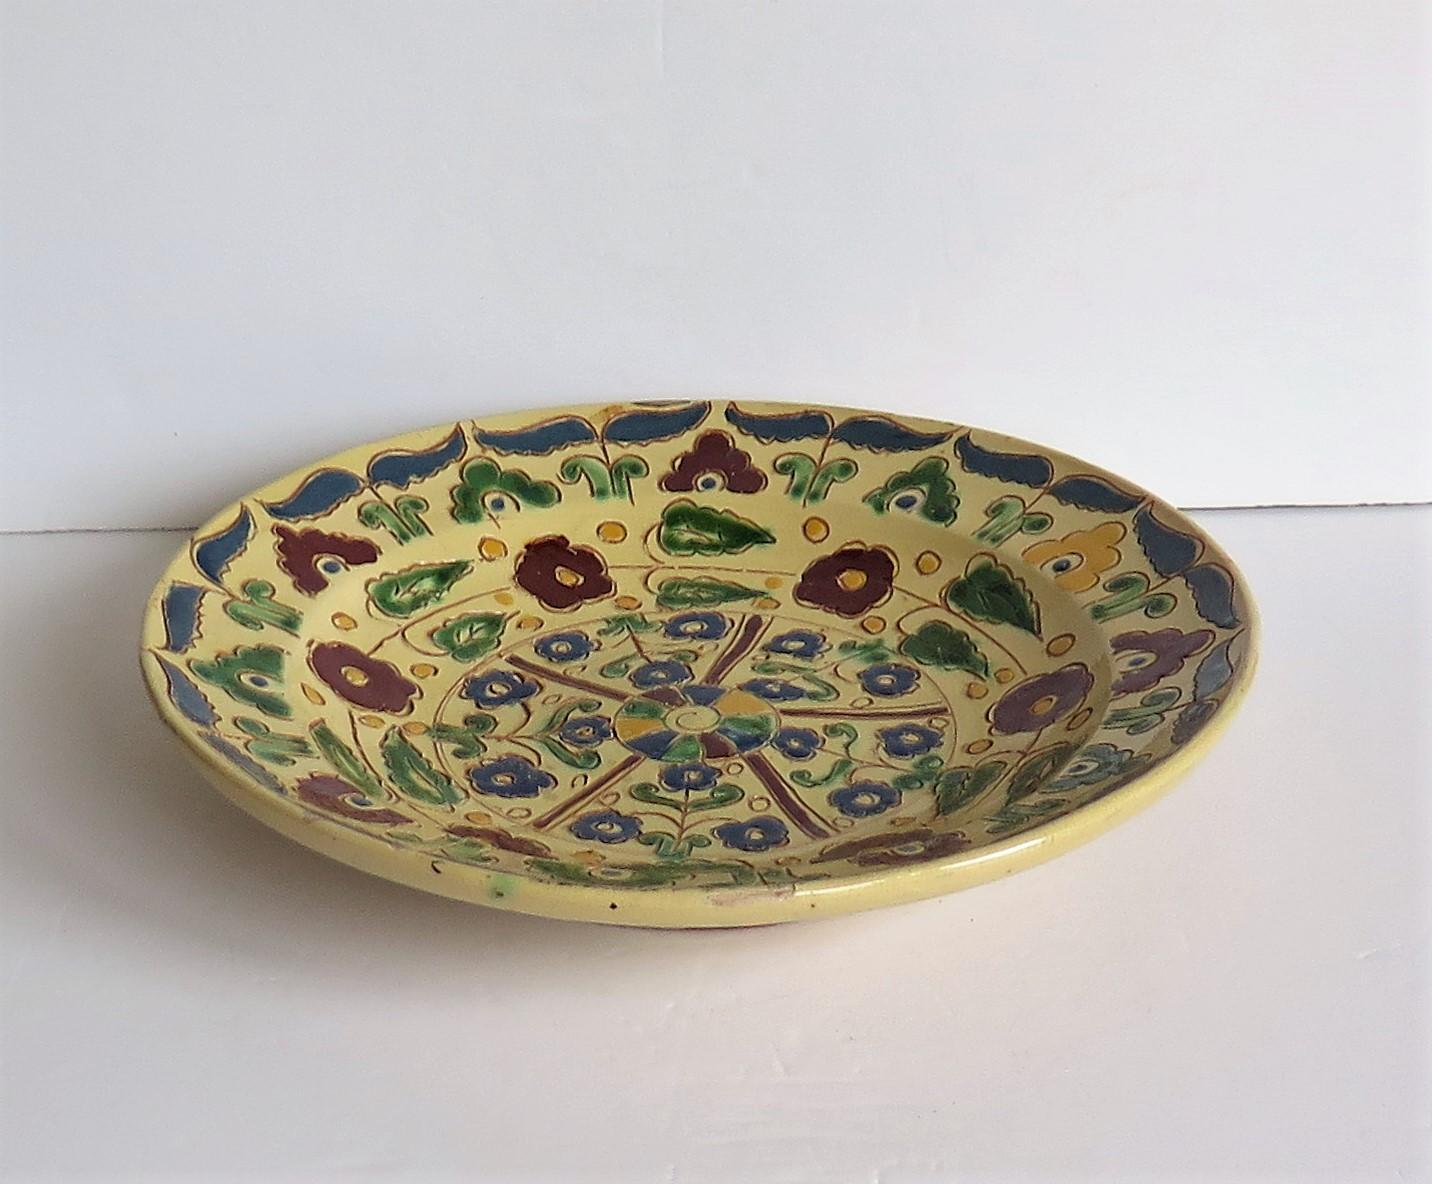 Glazed Rare Sgraffito Redware Slip Decorated Pottery Charger Large Plate, 19th Century For Sale